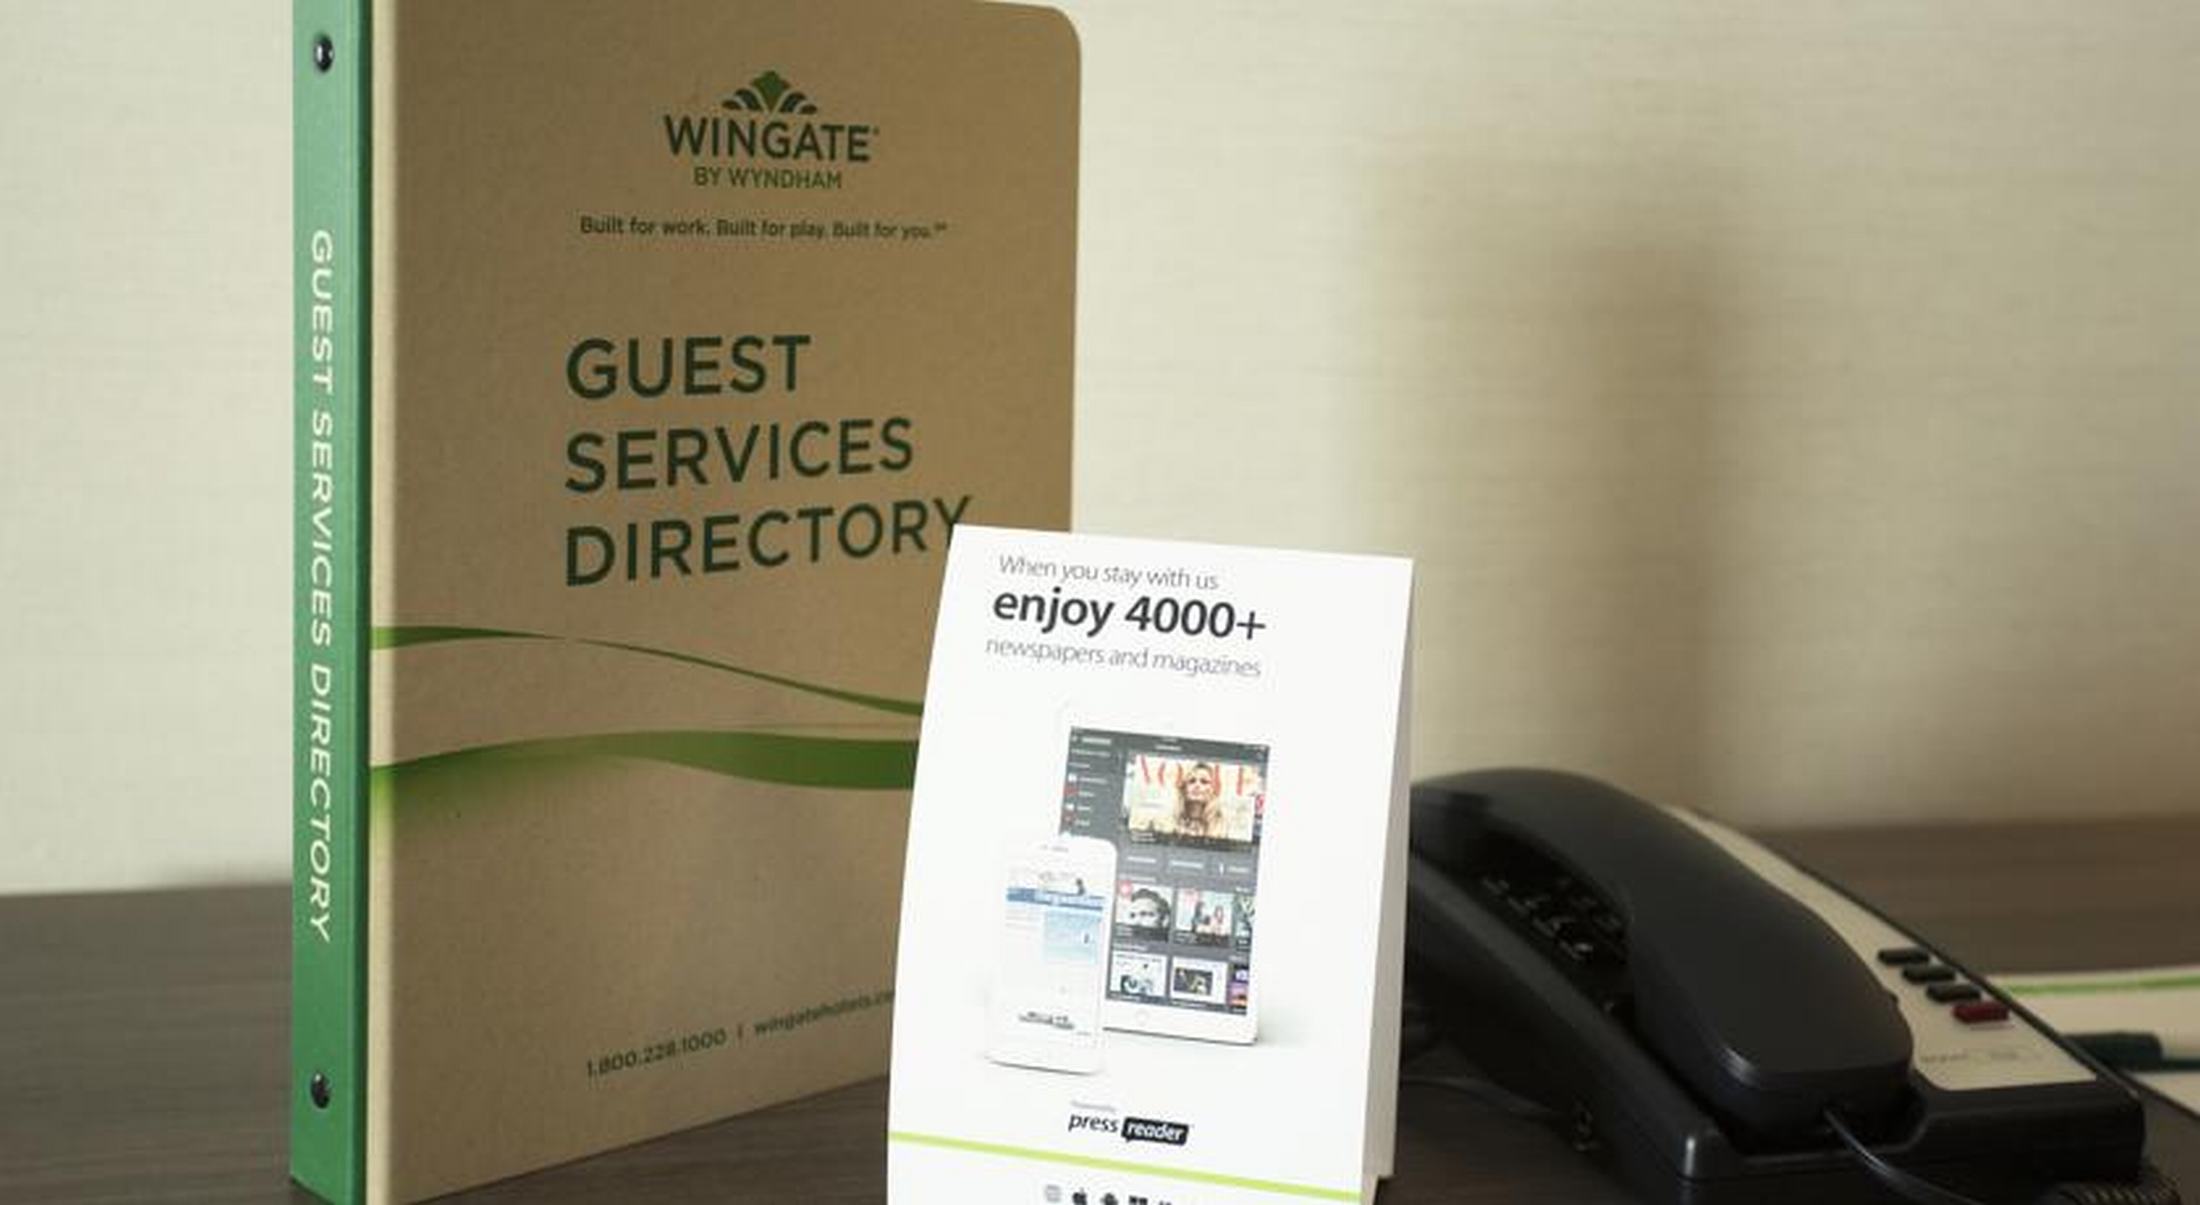 Wingate by Wyndham Calgary Airport